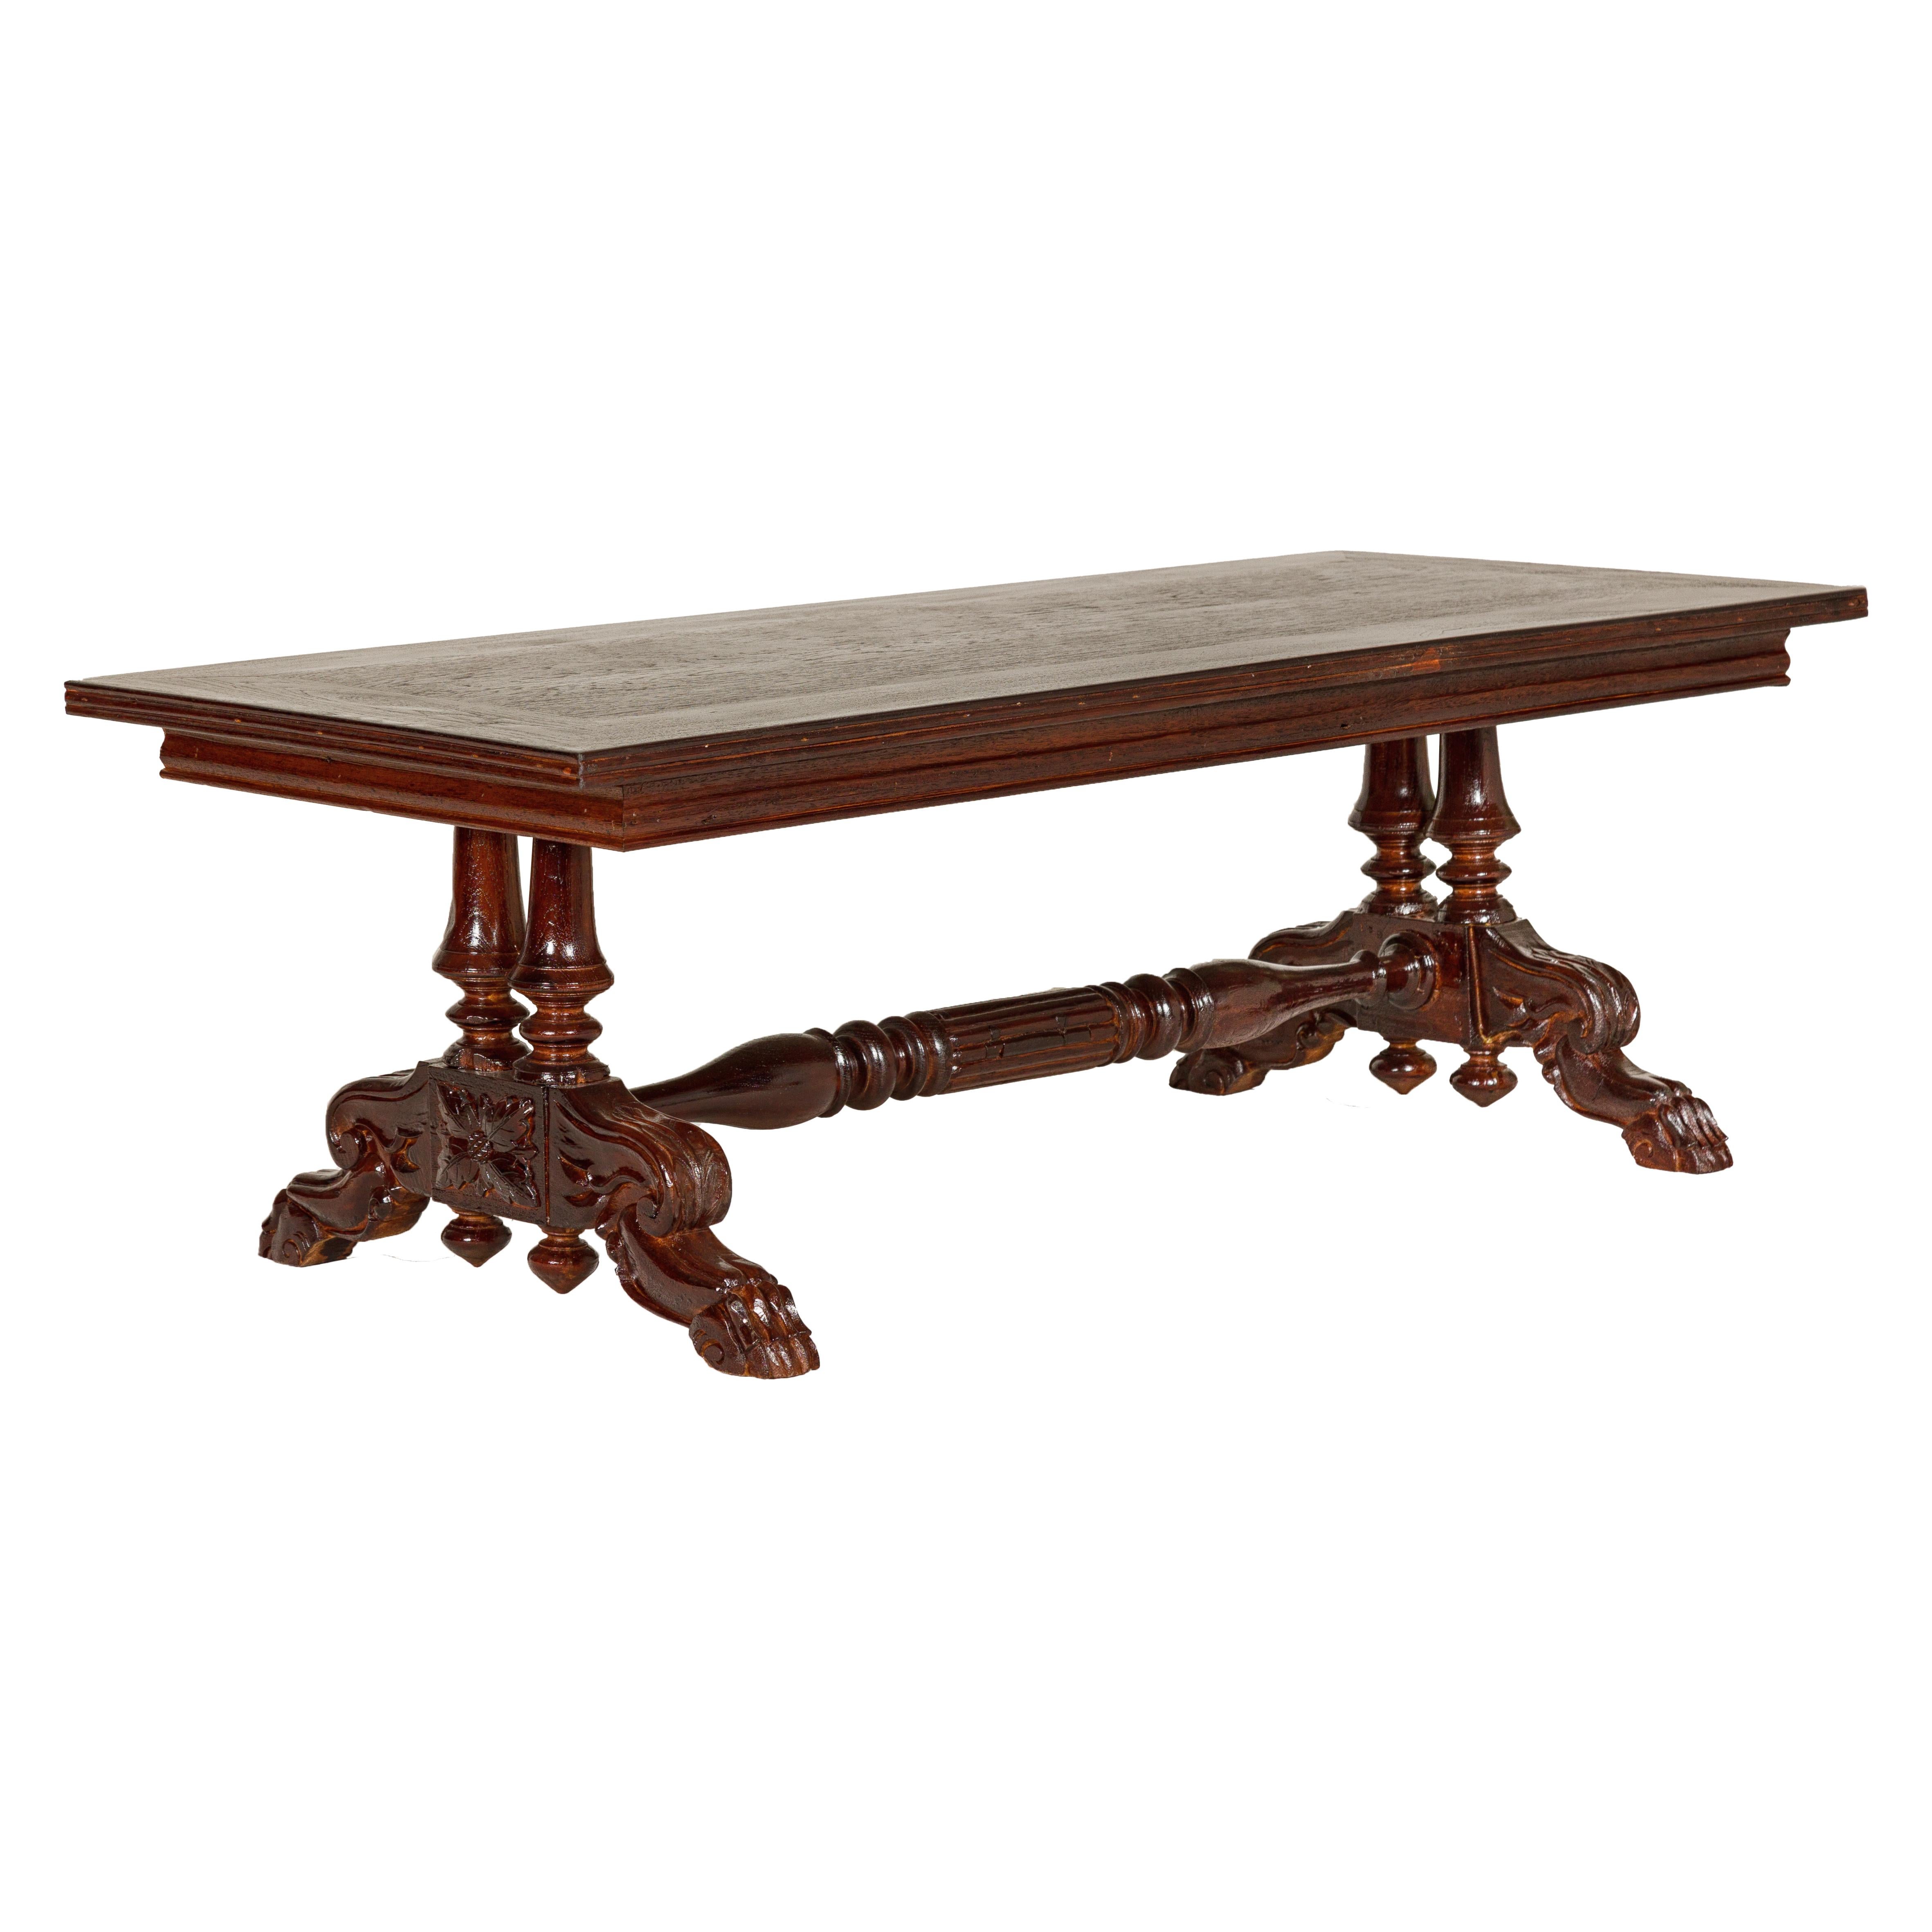 Dutch Colonial Ornate Coffee Table with Carved Lion Paw Legs and Cross Stretcher For Sale 11